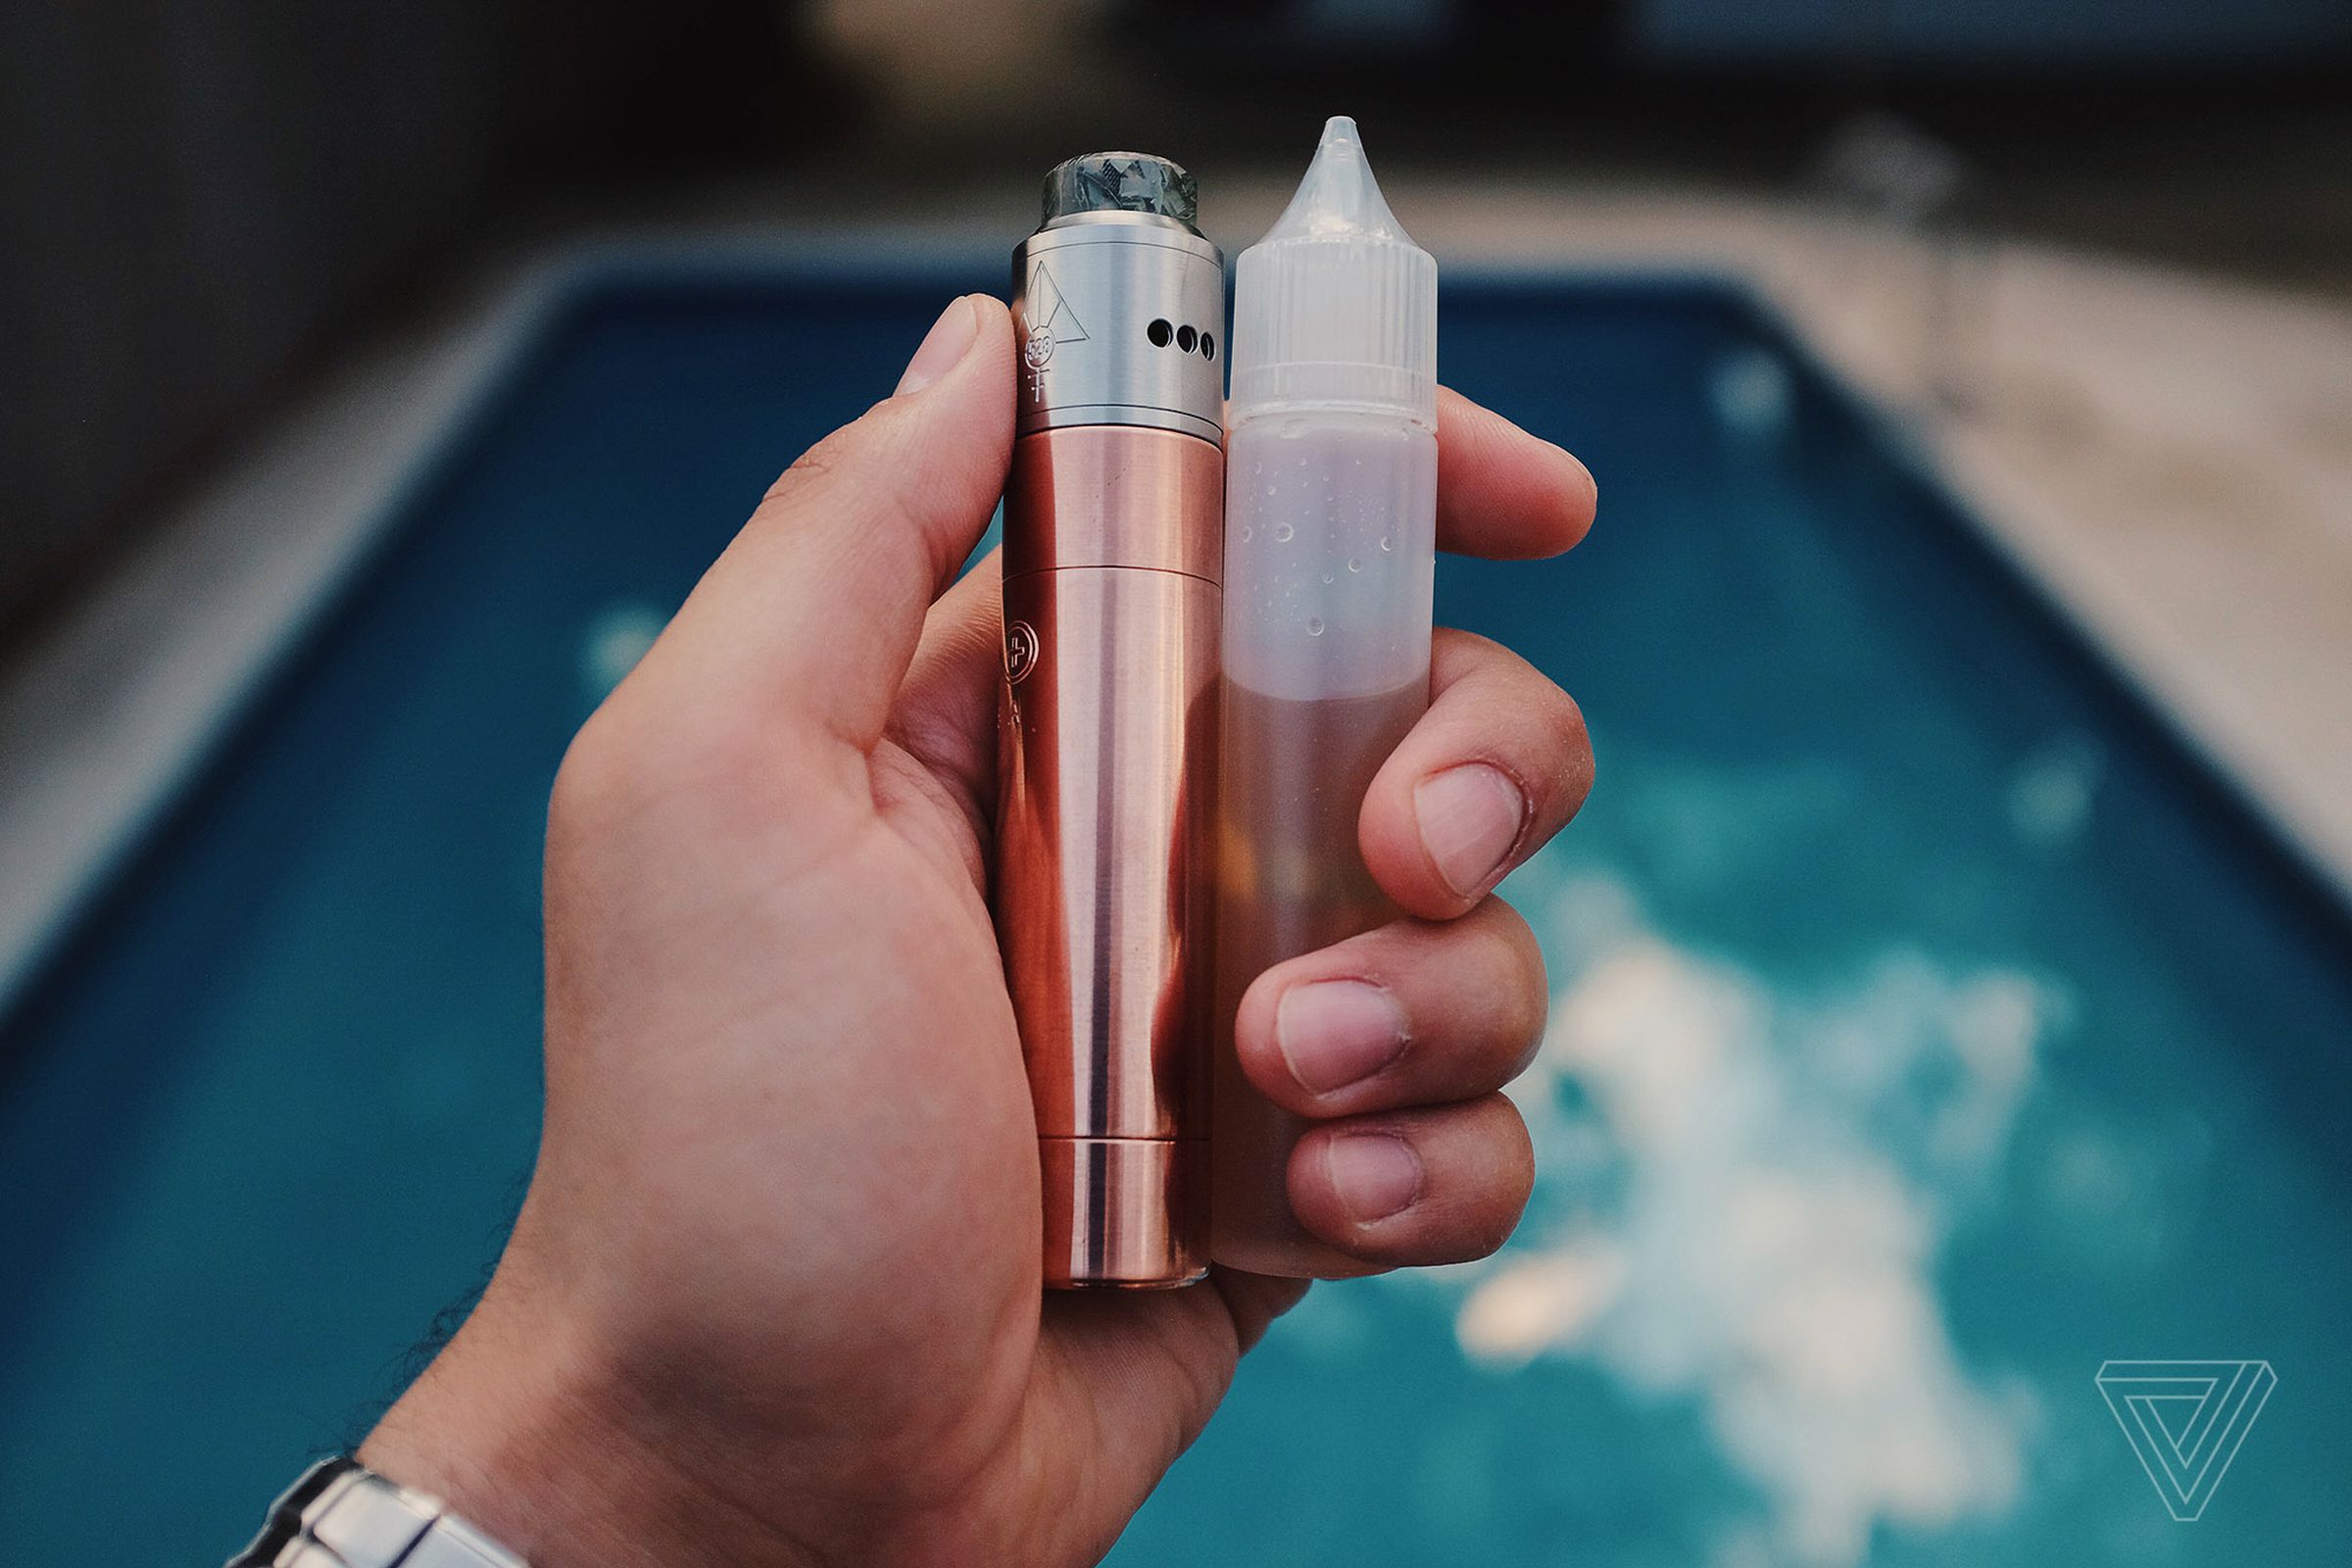 A mechanical tube mod with a rebuildable dripping atomizer and a bottle of vape juice.